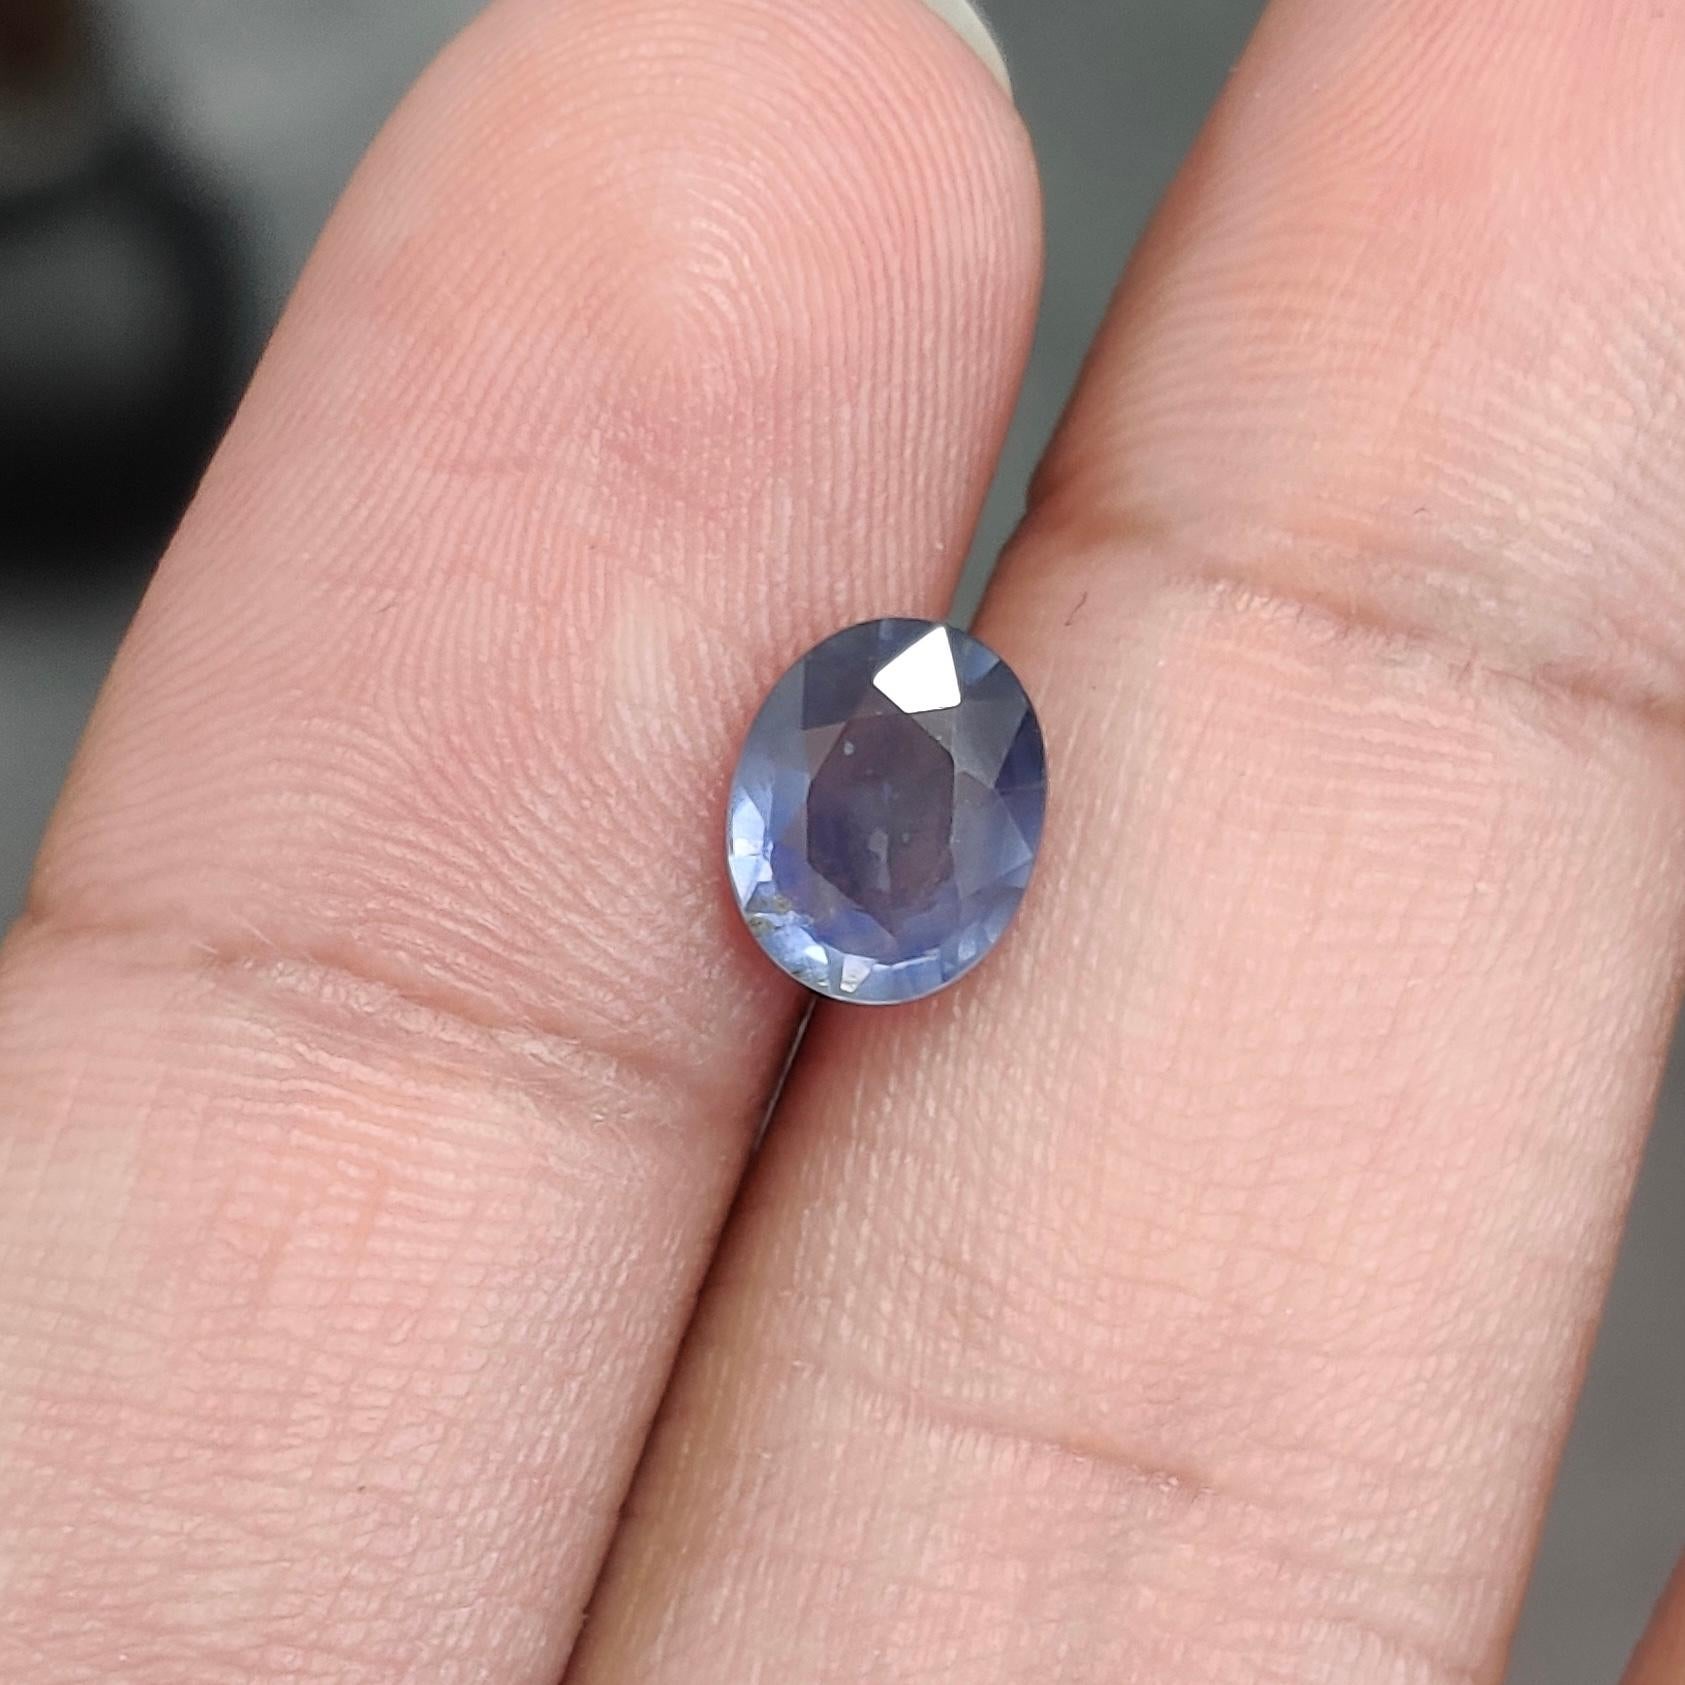 A beautiful, blue sapphire gemstone that also looks purple in some lightings because of its color changing properties. 1.68 Carat, oval cut sapphire that originates from Madagascar and has not undergone any form of treatment. It is a 100% natural